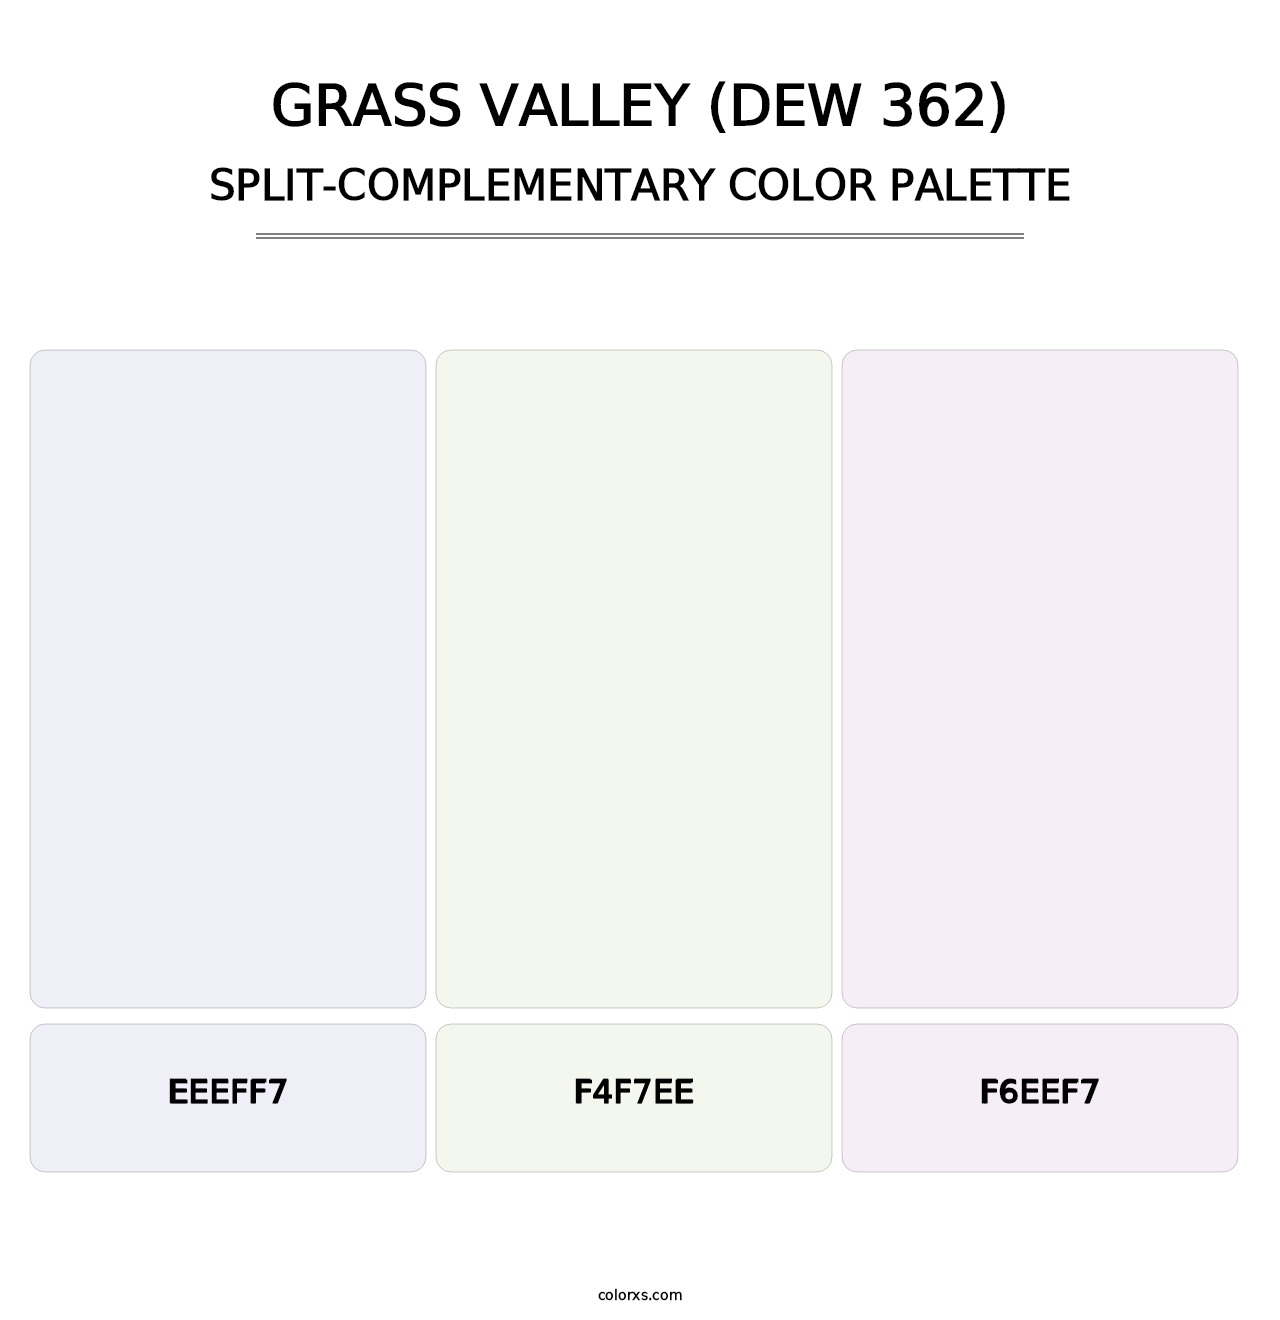 Grass Valley (DEW 362) - Split-Complementary Color Palette